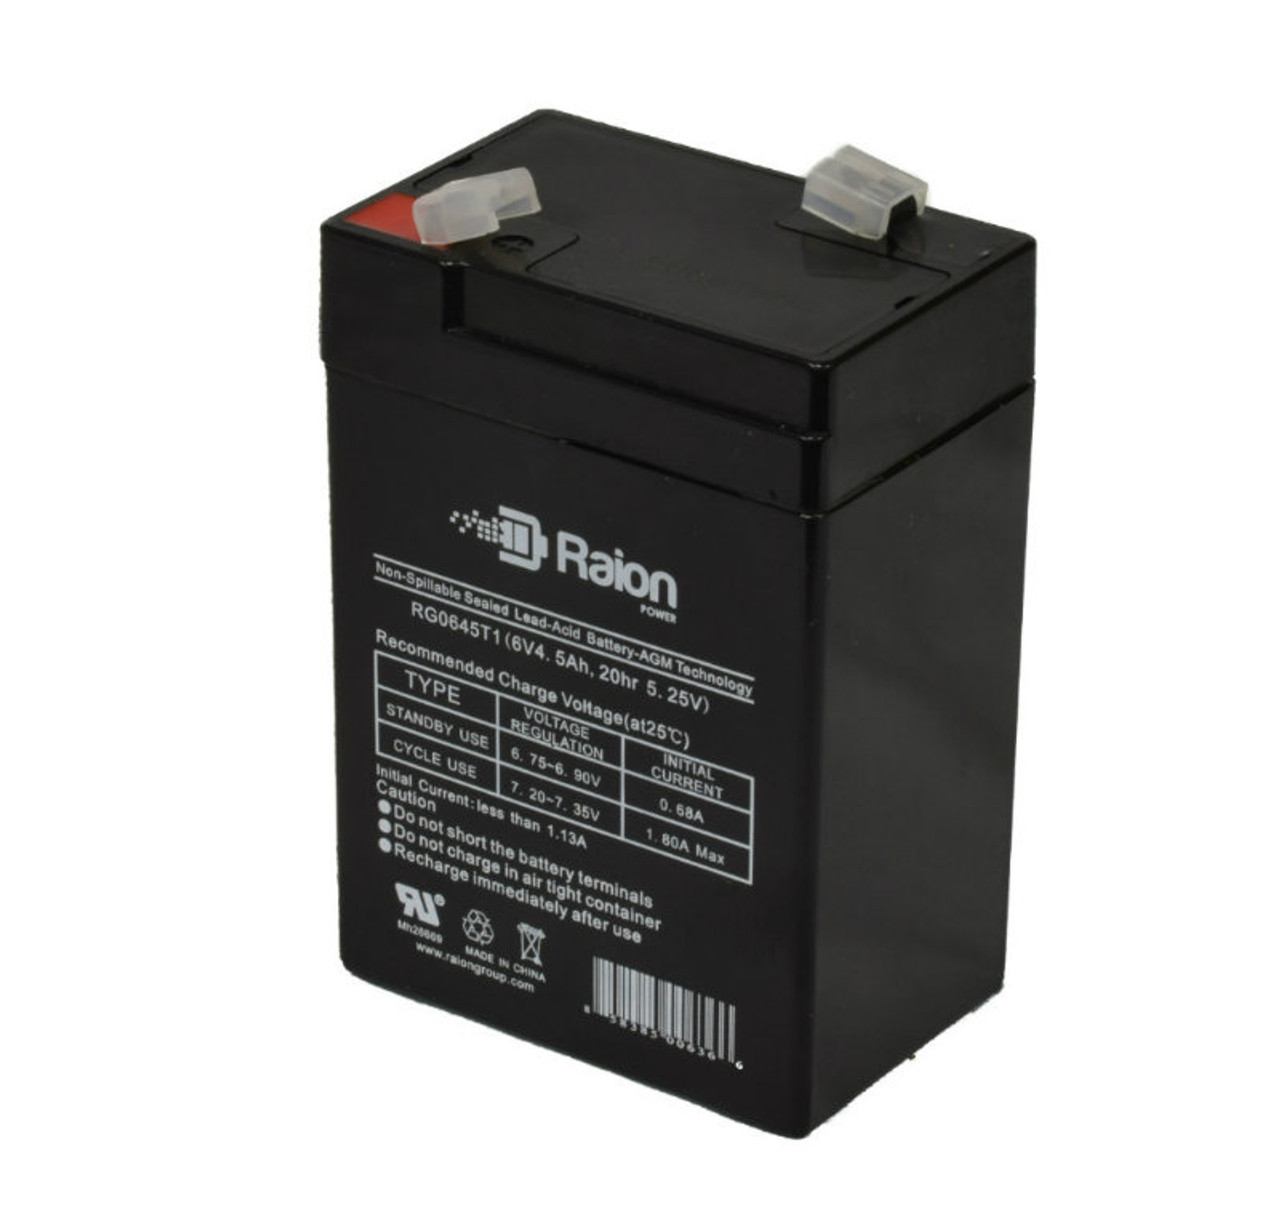 Raion Power RG0645T1 6V 4.5Ah Replacement Battery Cartridge for FirstPower FP660